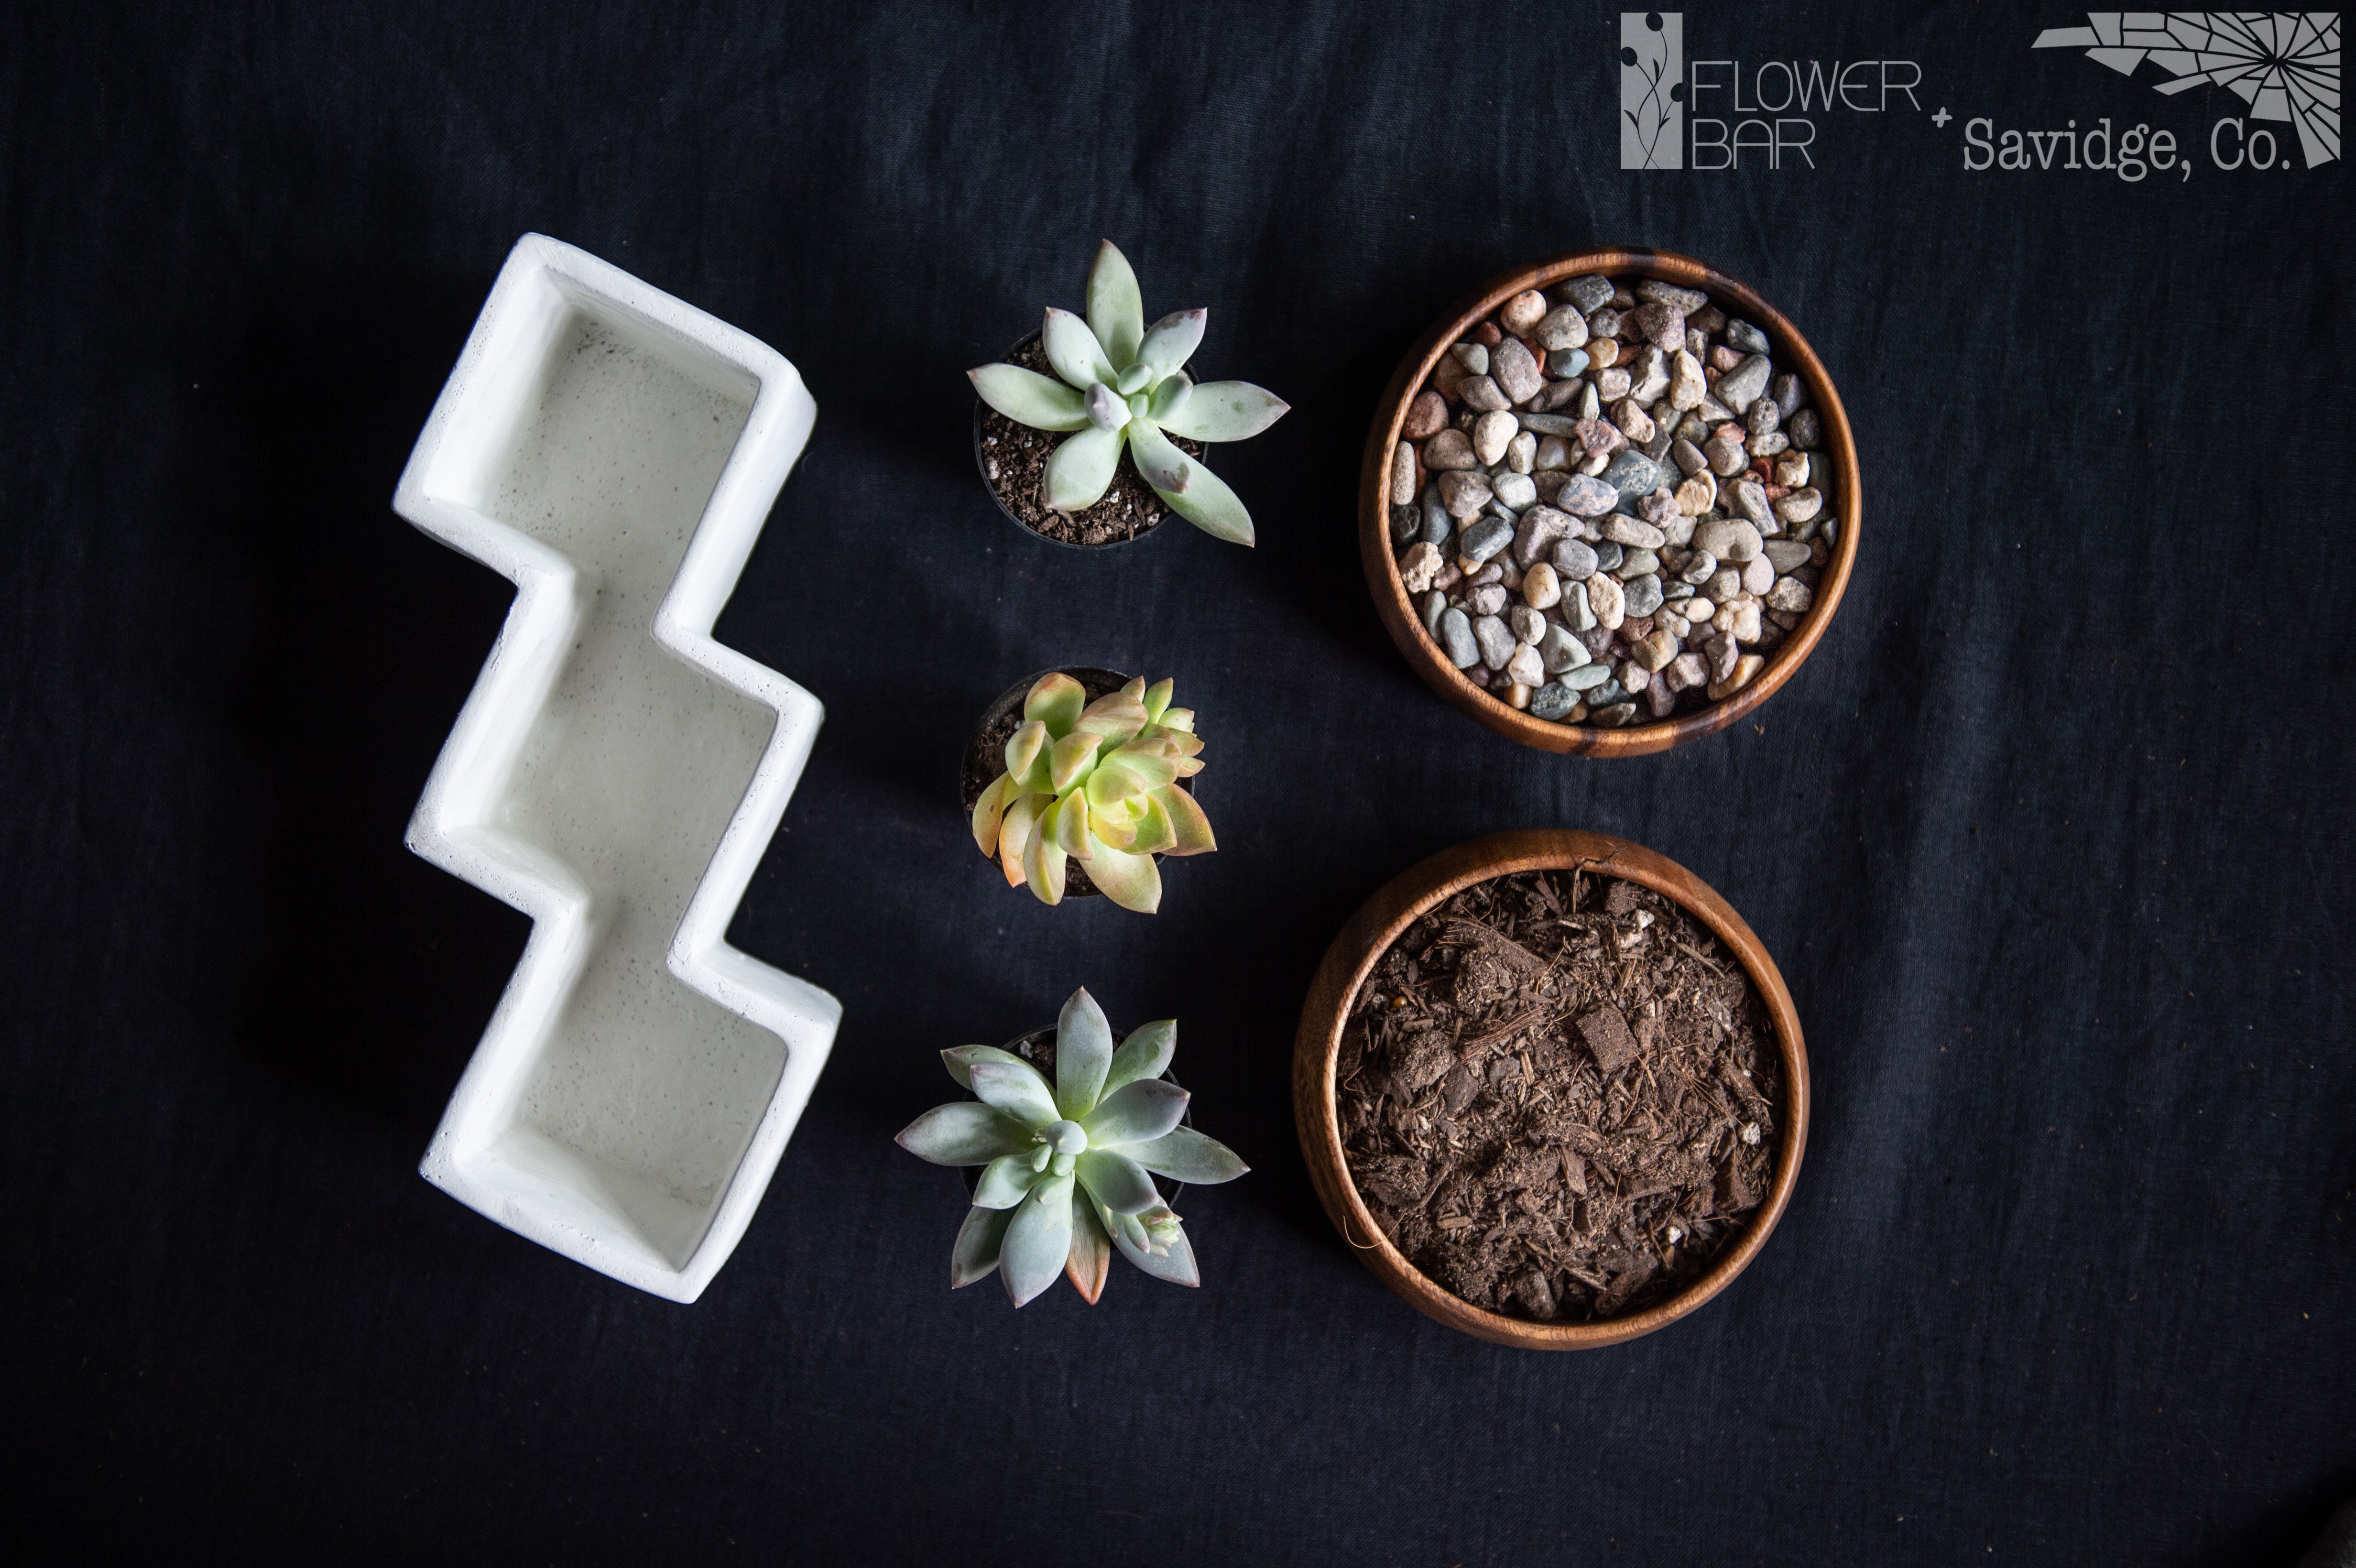 The Museum Plant Project Ingredients. Soil, rocks, 3 cactus or succulents, and a white ceramic zig zag planter